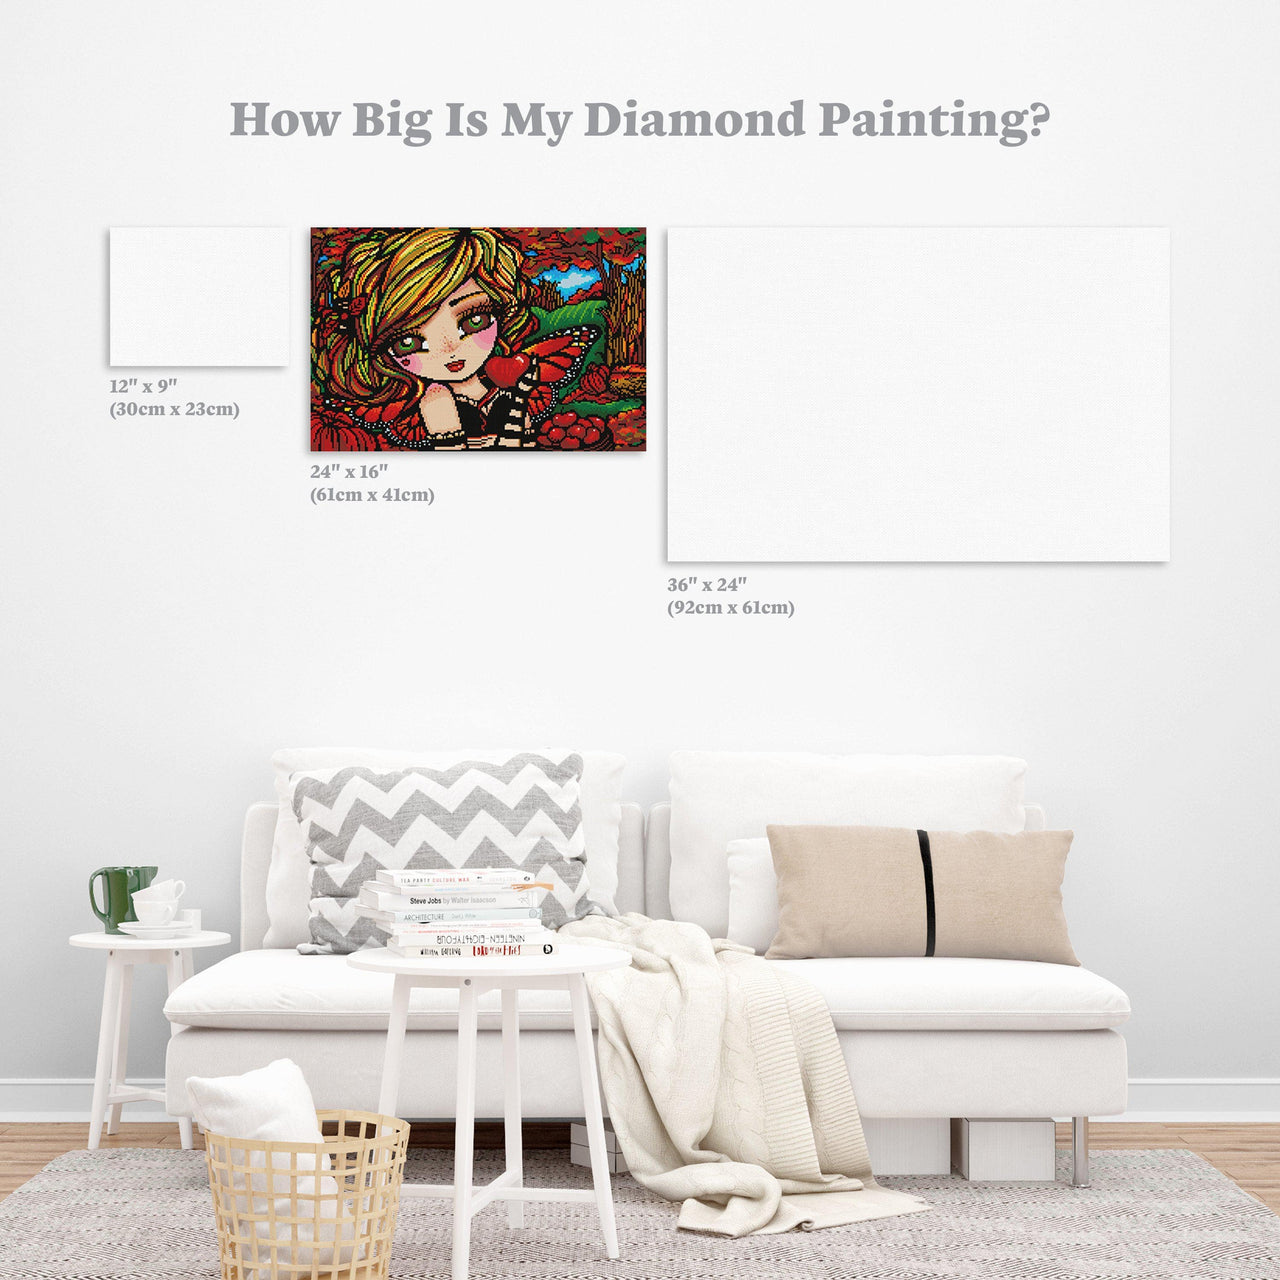 Diamond Painting Mona 16" x 24″ (41cm x 61cm) / Round with 33 Colors including 3 ABs / 31,104